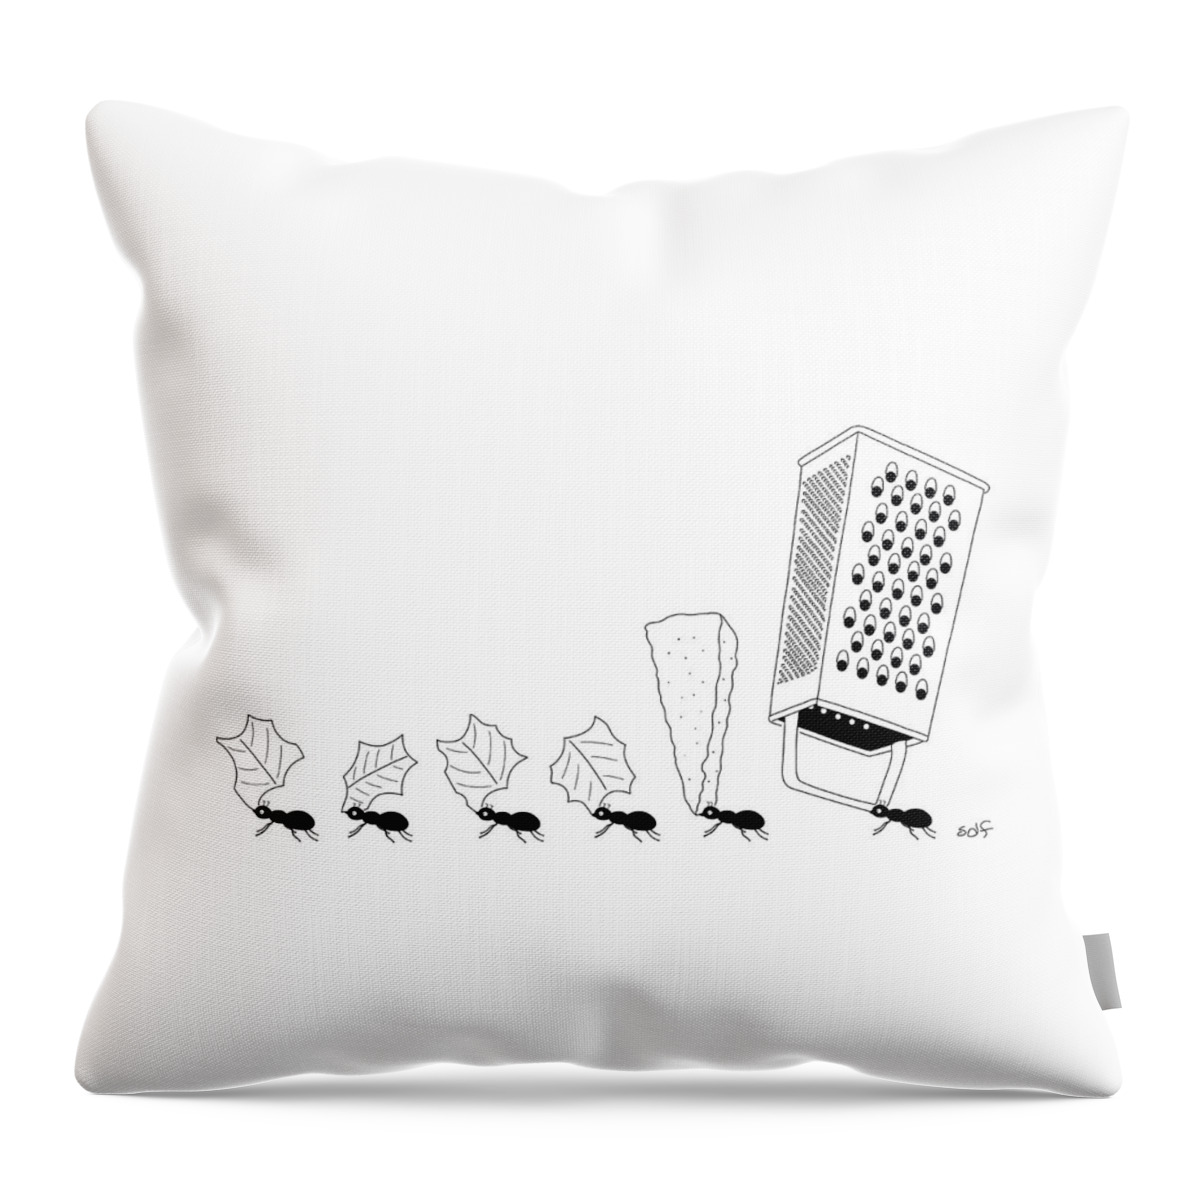 Ants With Cheese Grater Throw Pillow